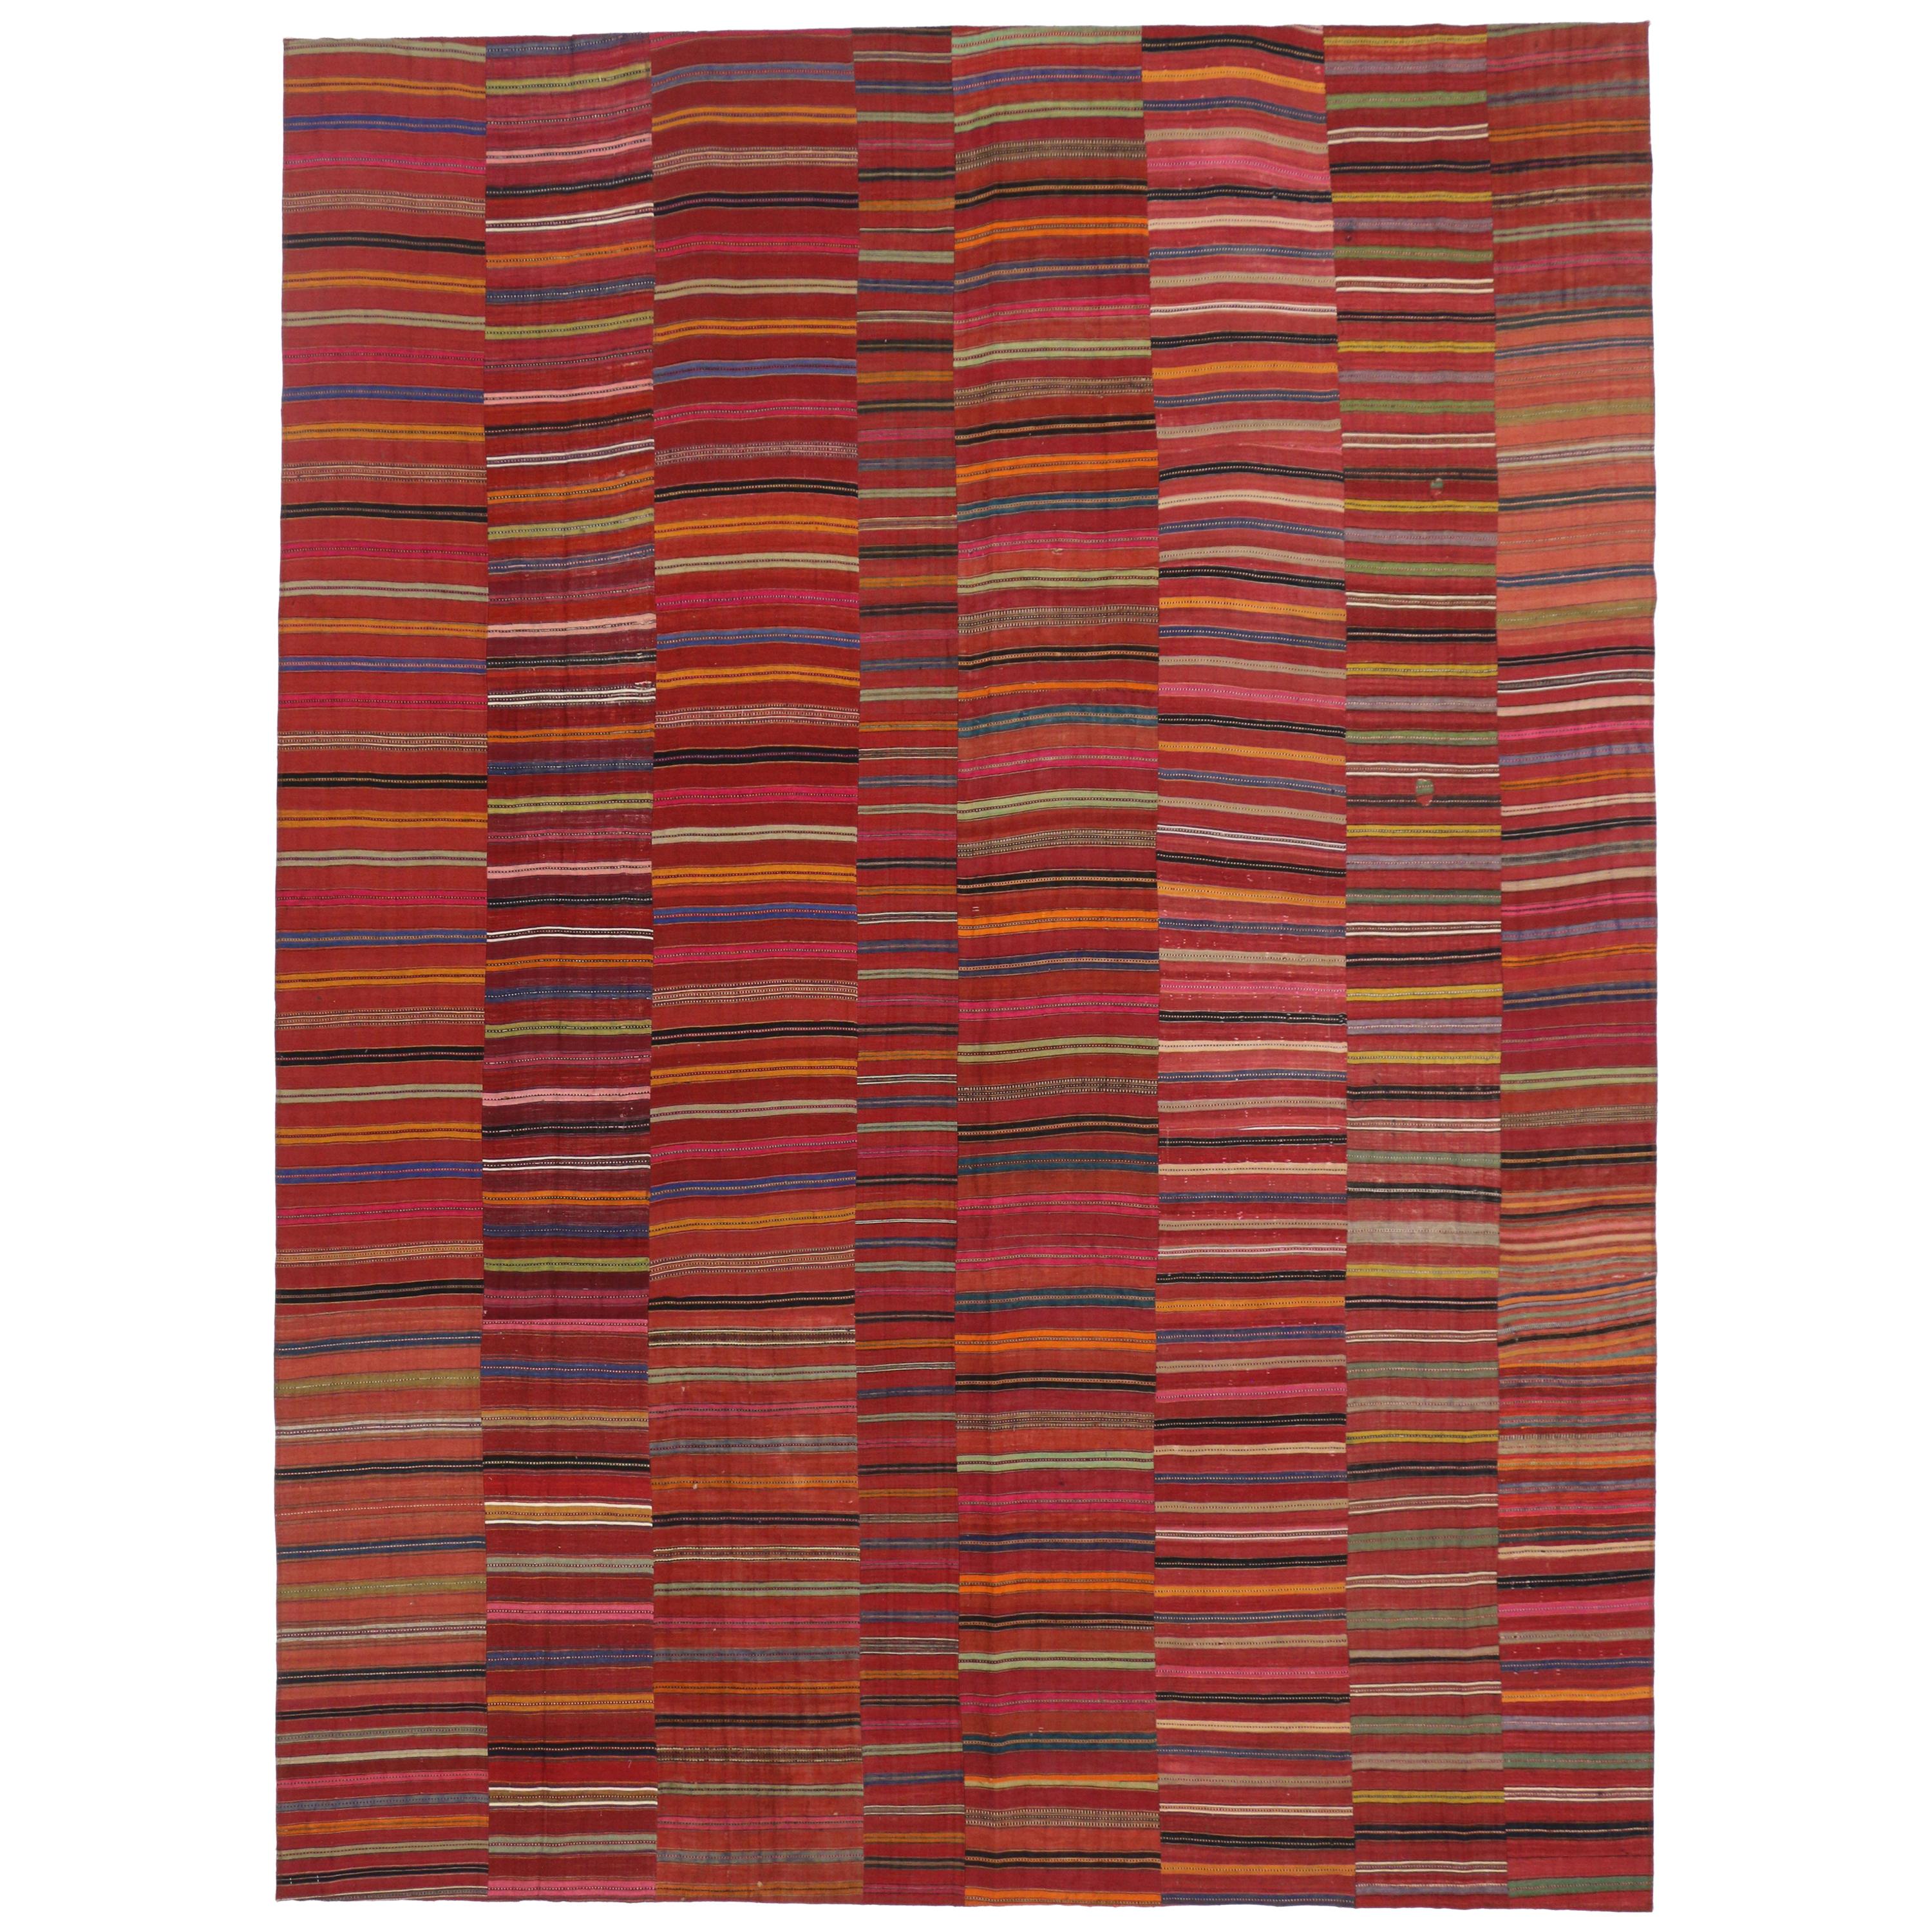 Distressed Vintage Turkish Kilim Rug with Bayadere Stripes and Rustic Style